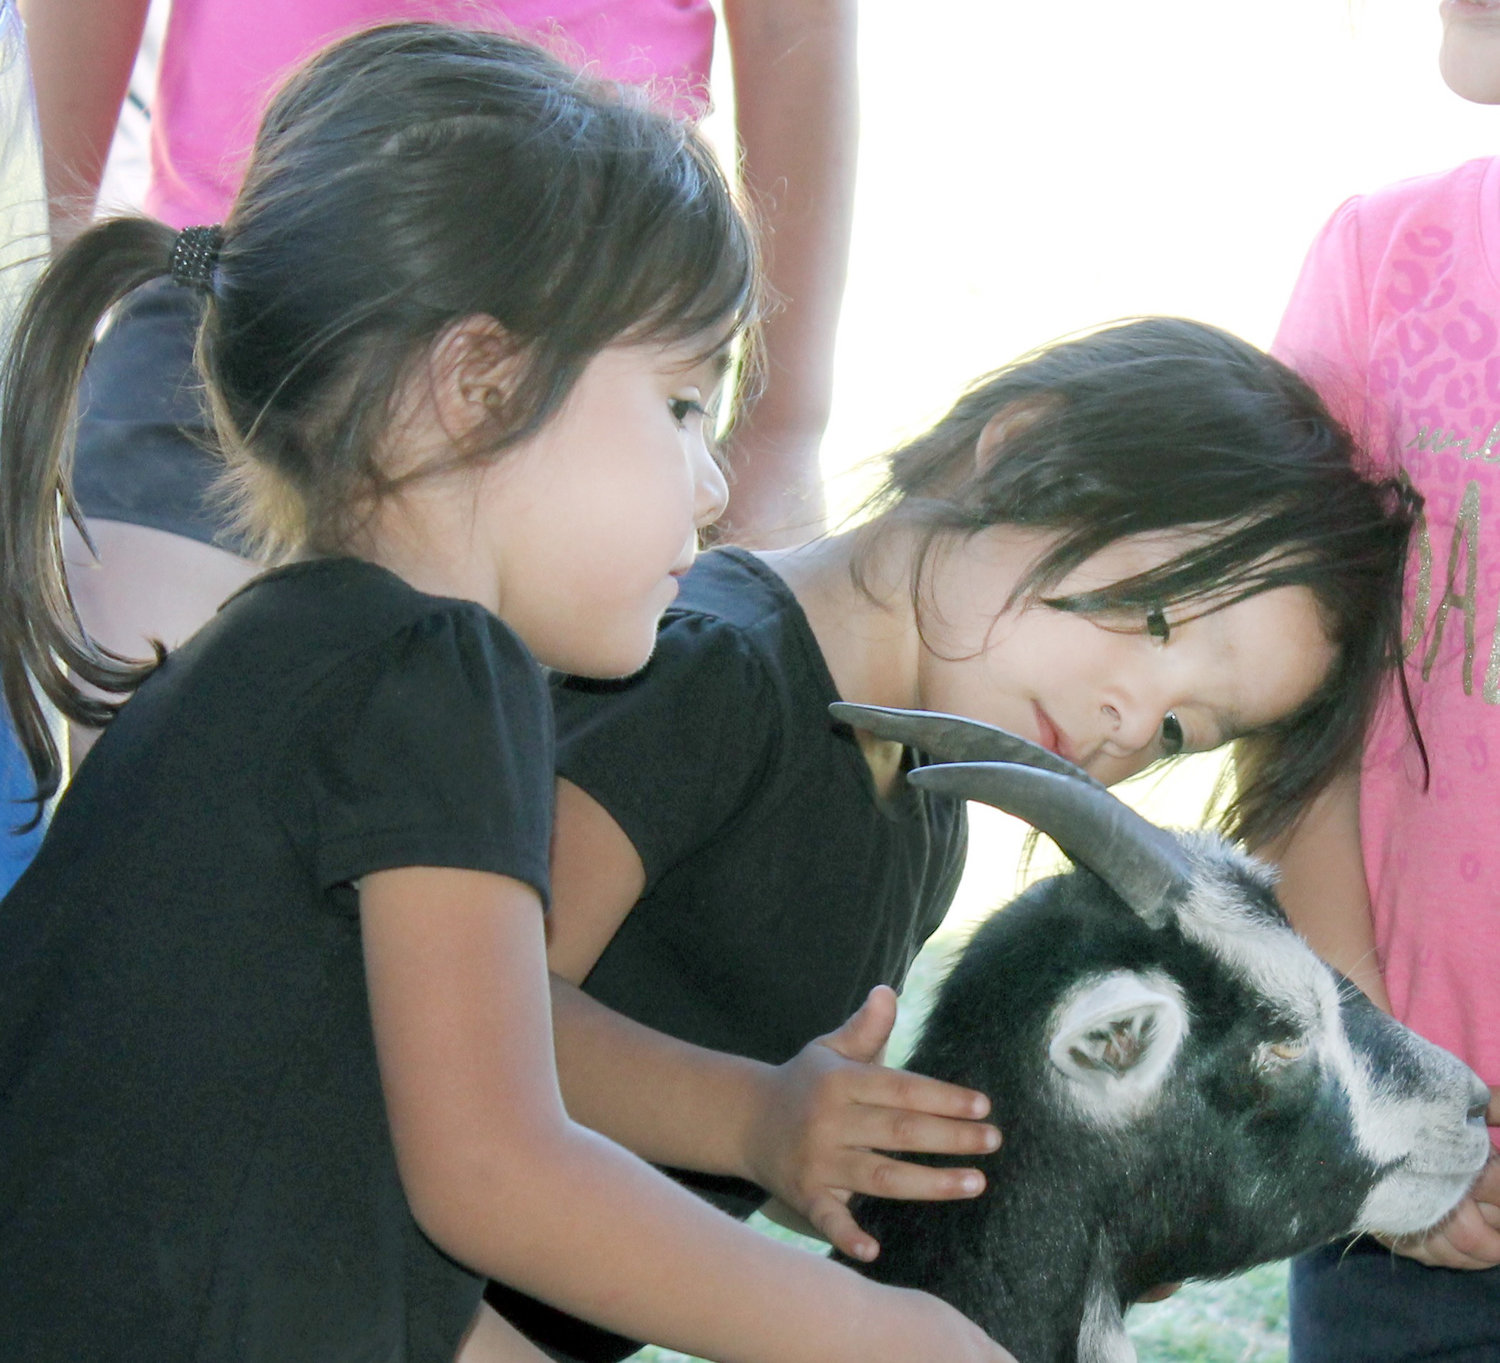 The Carson & Barnes Circus brought a petting zoo that attracted folks to pet the animals. This extremely friendly little goat was free to roam the grounds and was the center of attention of some little girls. (Monitor photos by Doris Newman)